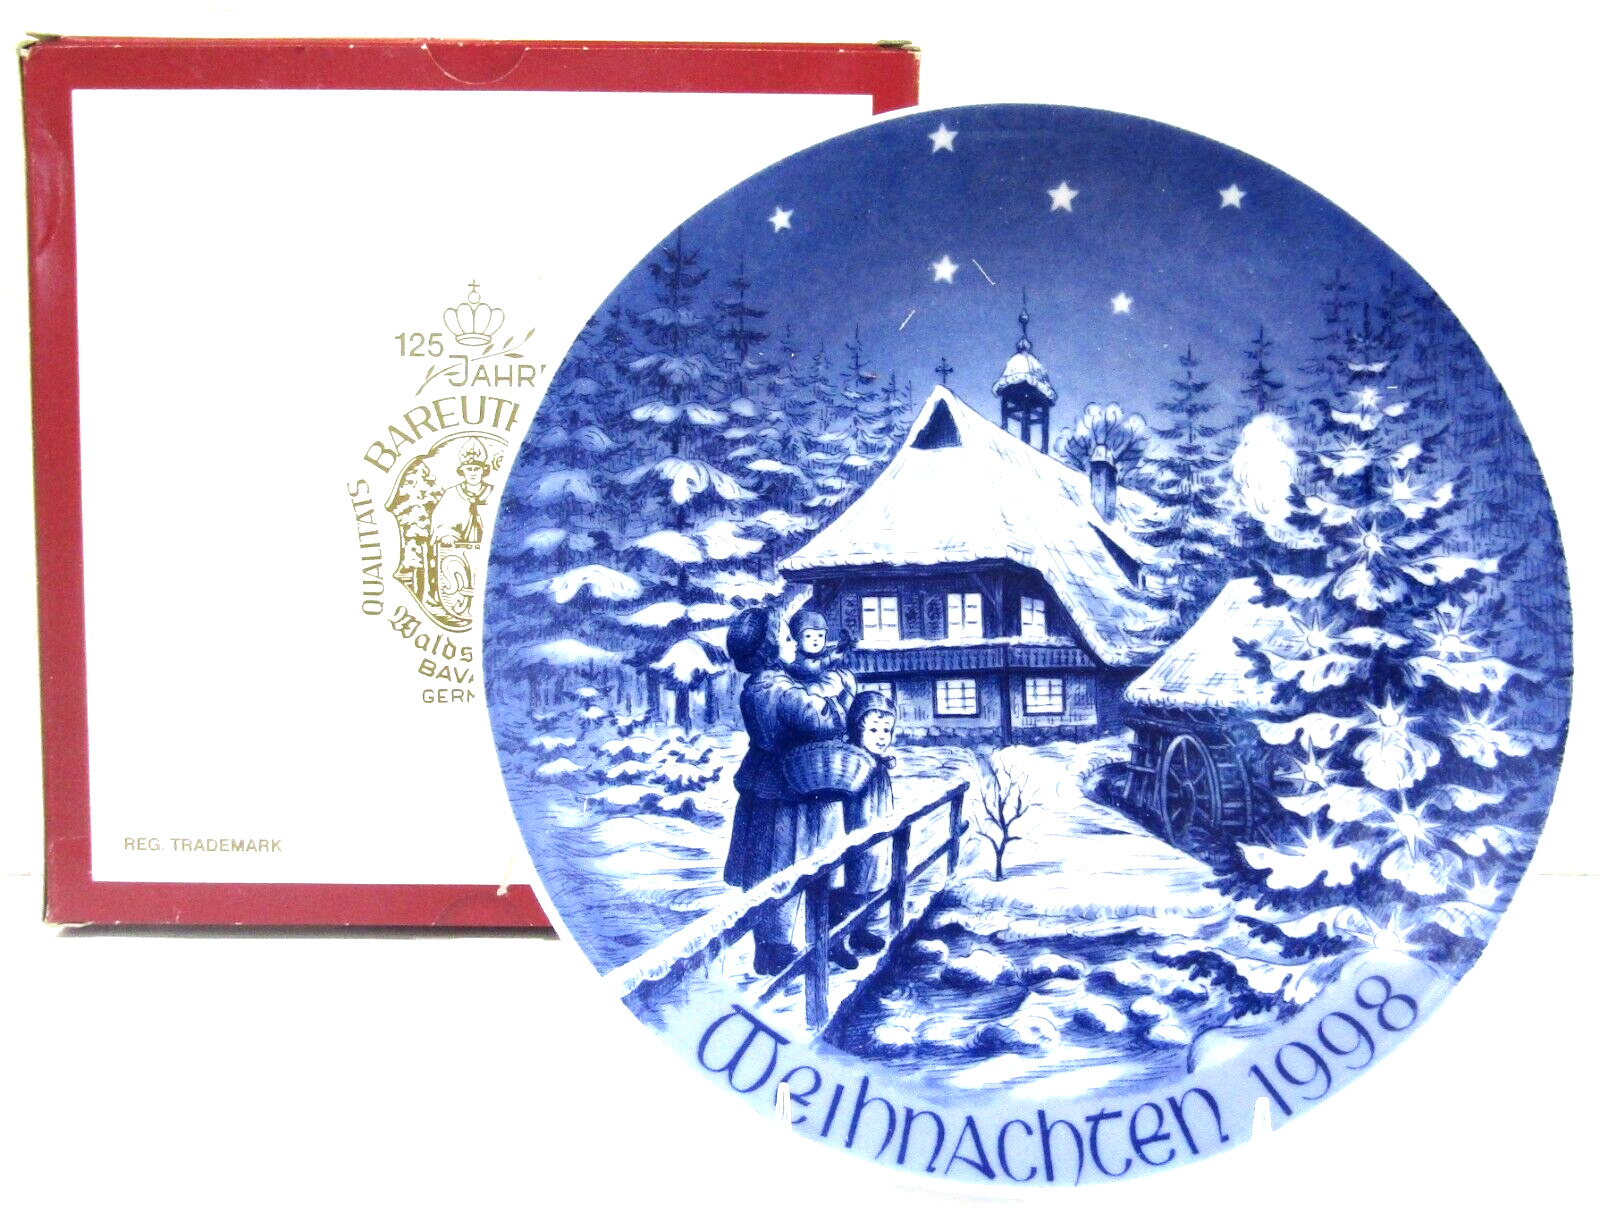 1998 Bareuther Bavaria Germany Weihnachten 1998 Christmas Plate and Box